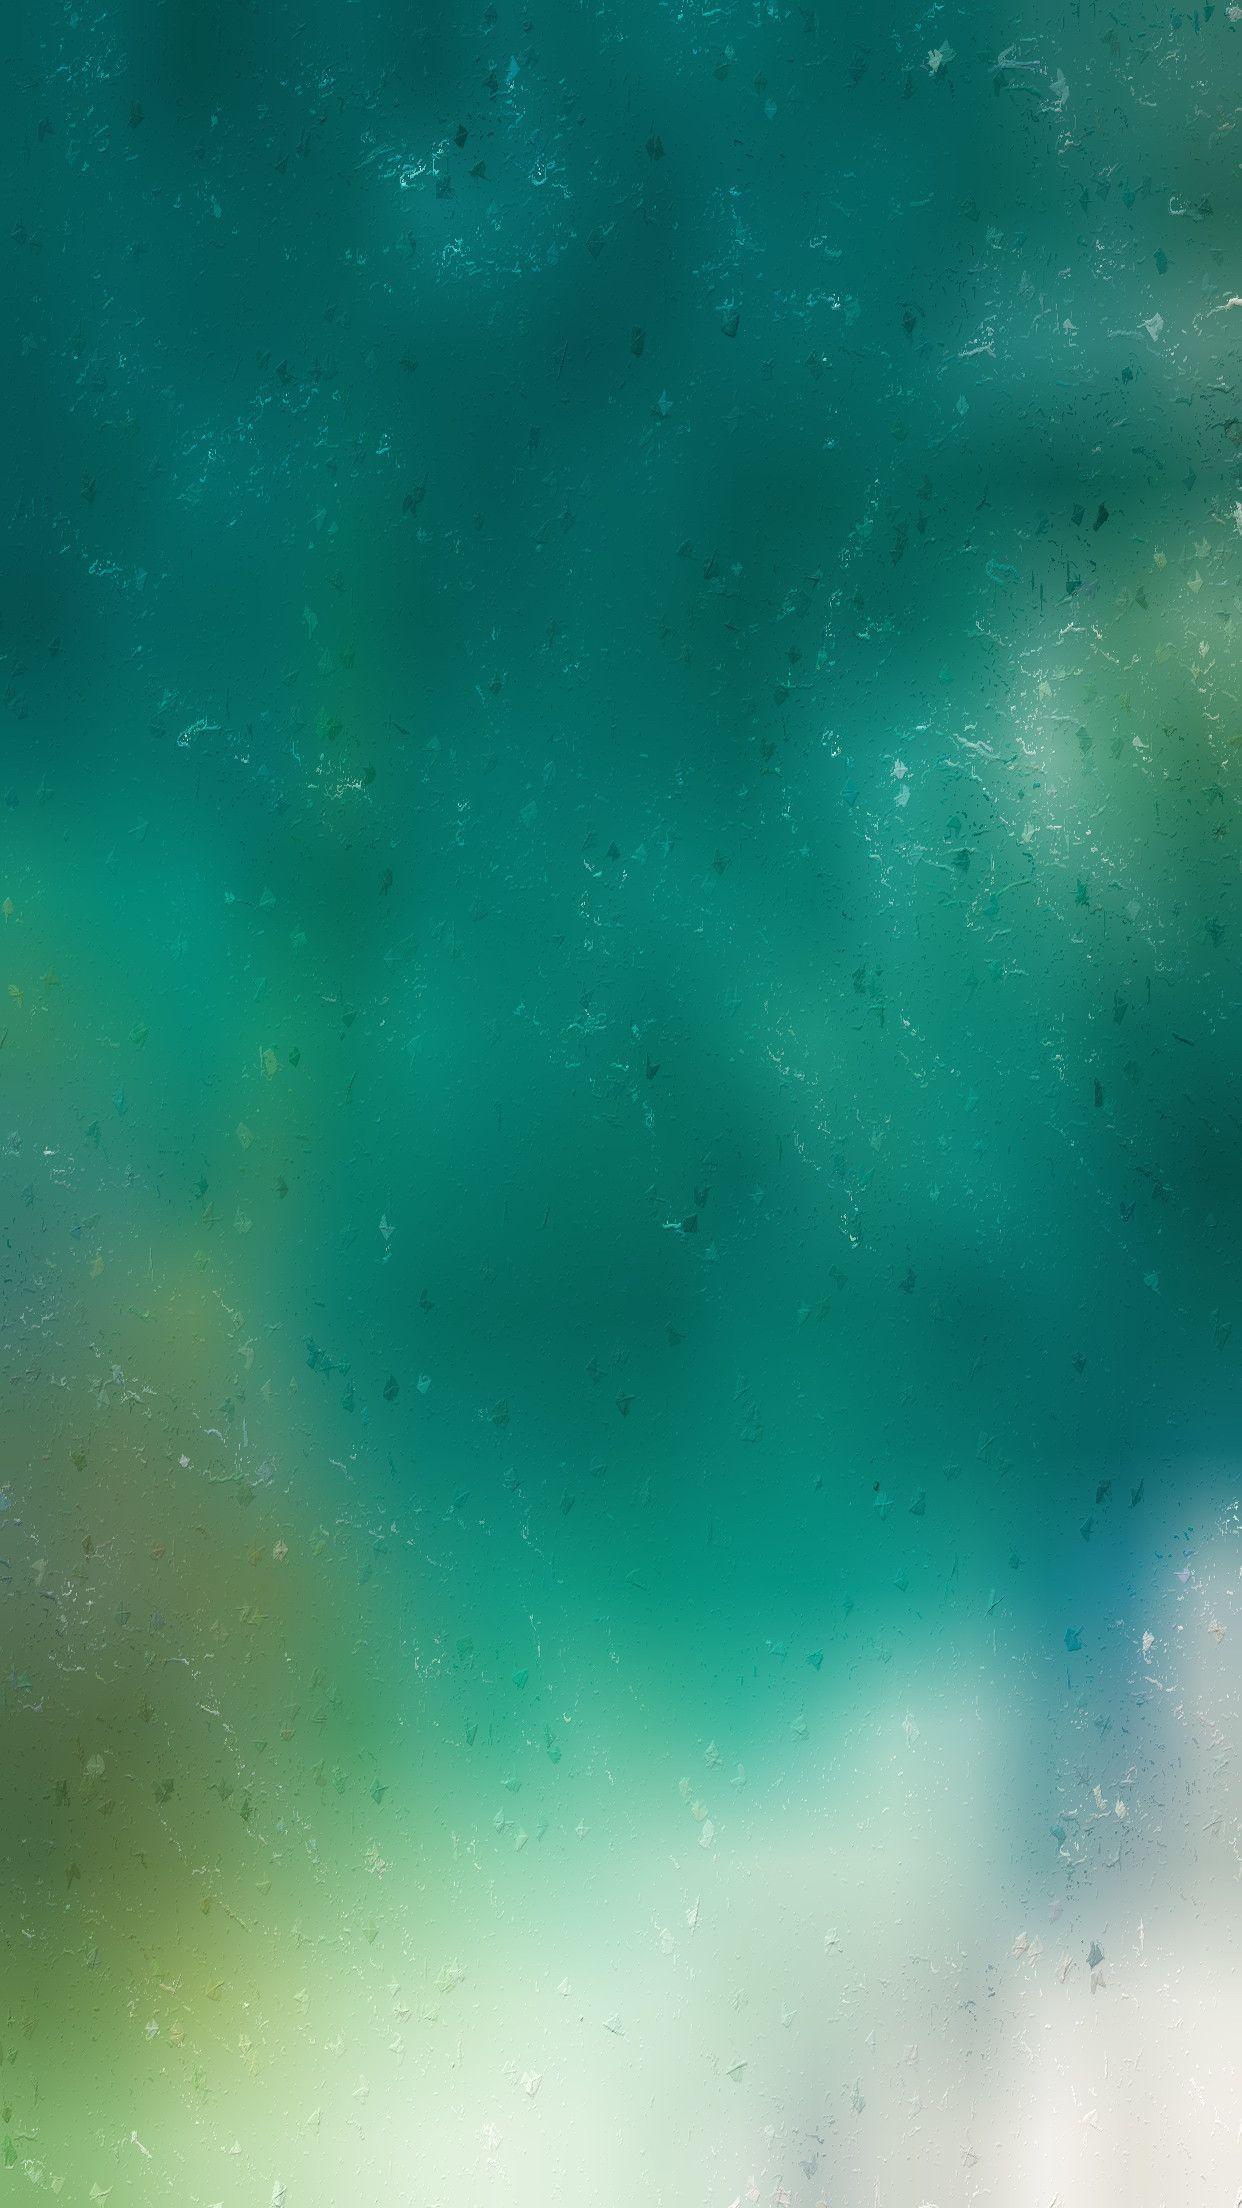 Green iPhone Wallpapers - Top Free Green iPhone Backgrounds ...